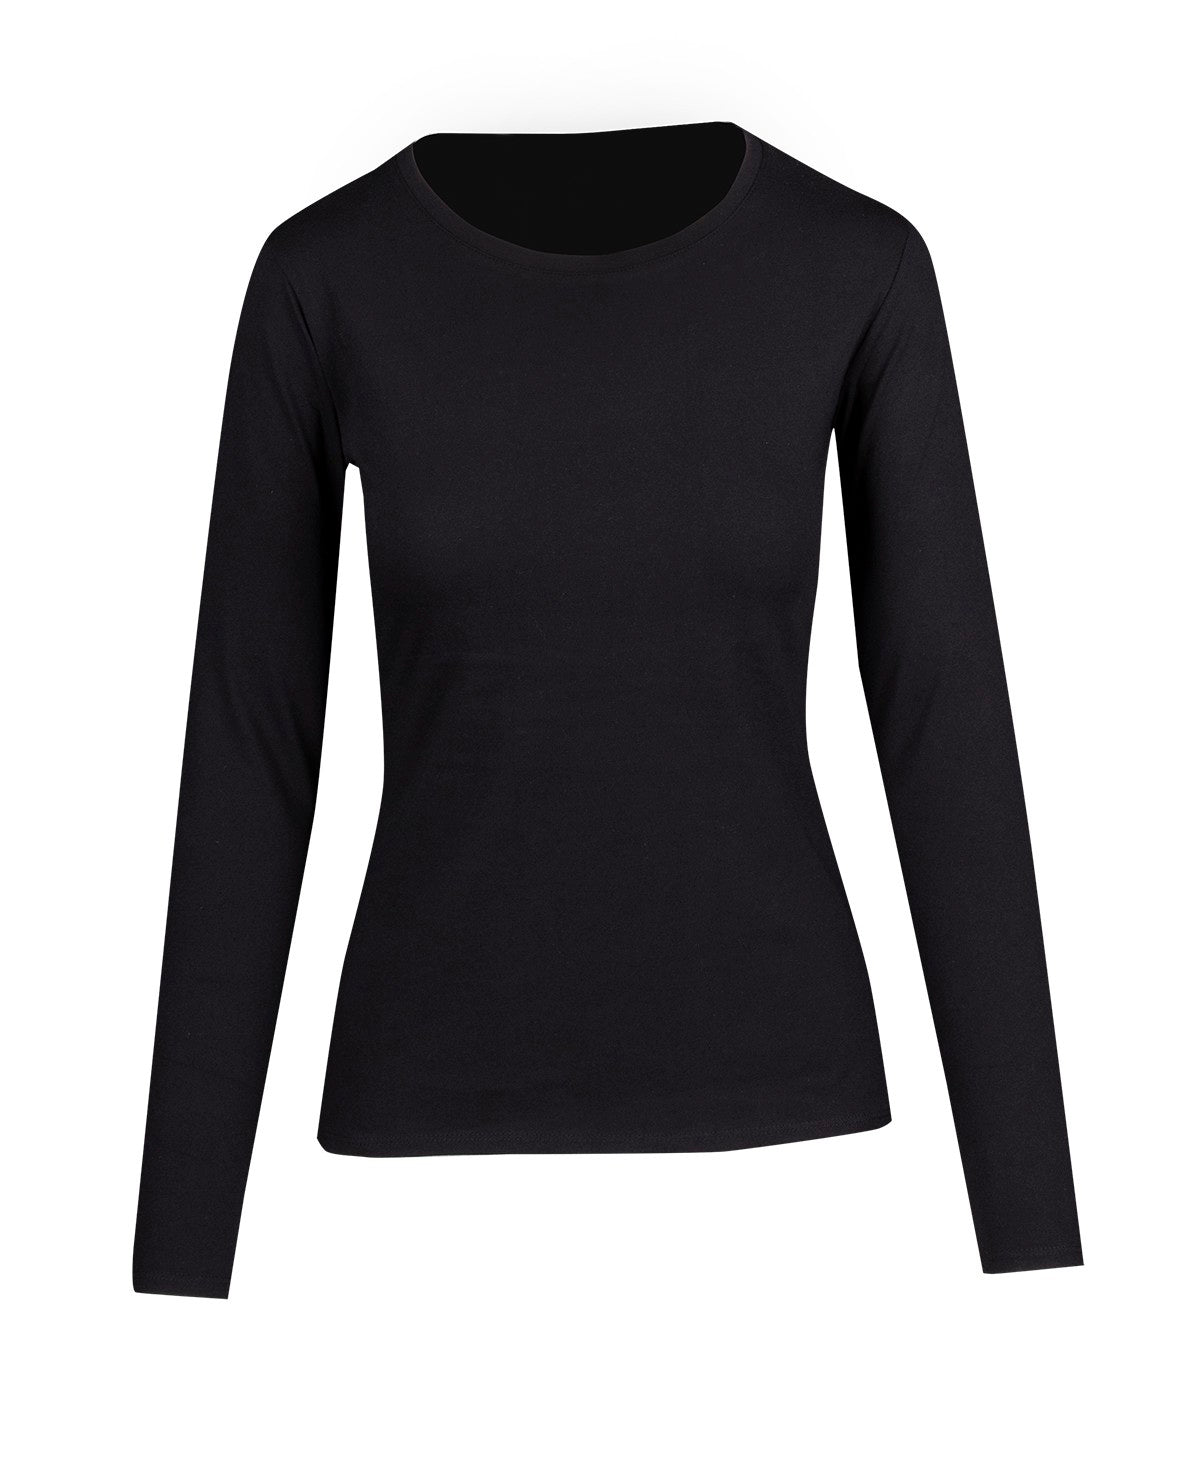 Casey Long Sleeve Top.  It's made of 100% fine cotton jersey, perfect for layering on those cooler days. It has a slim fit long cut, a round neck, and comes in black and white.